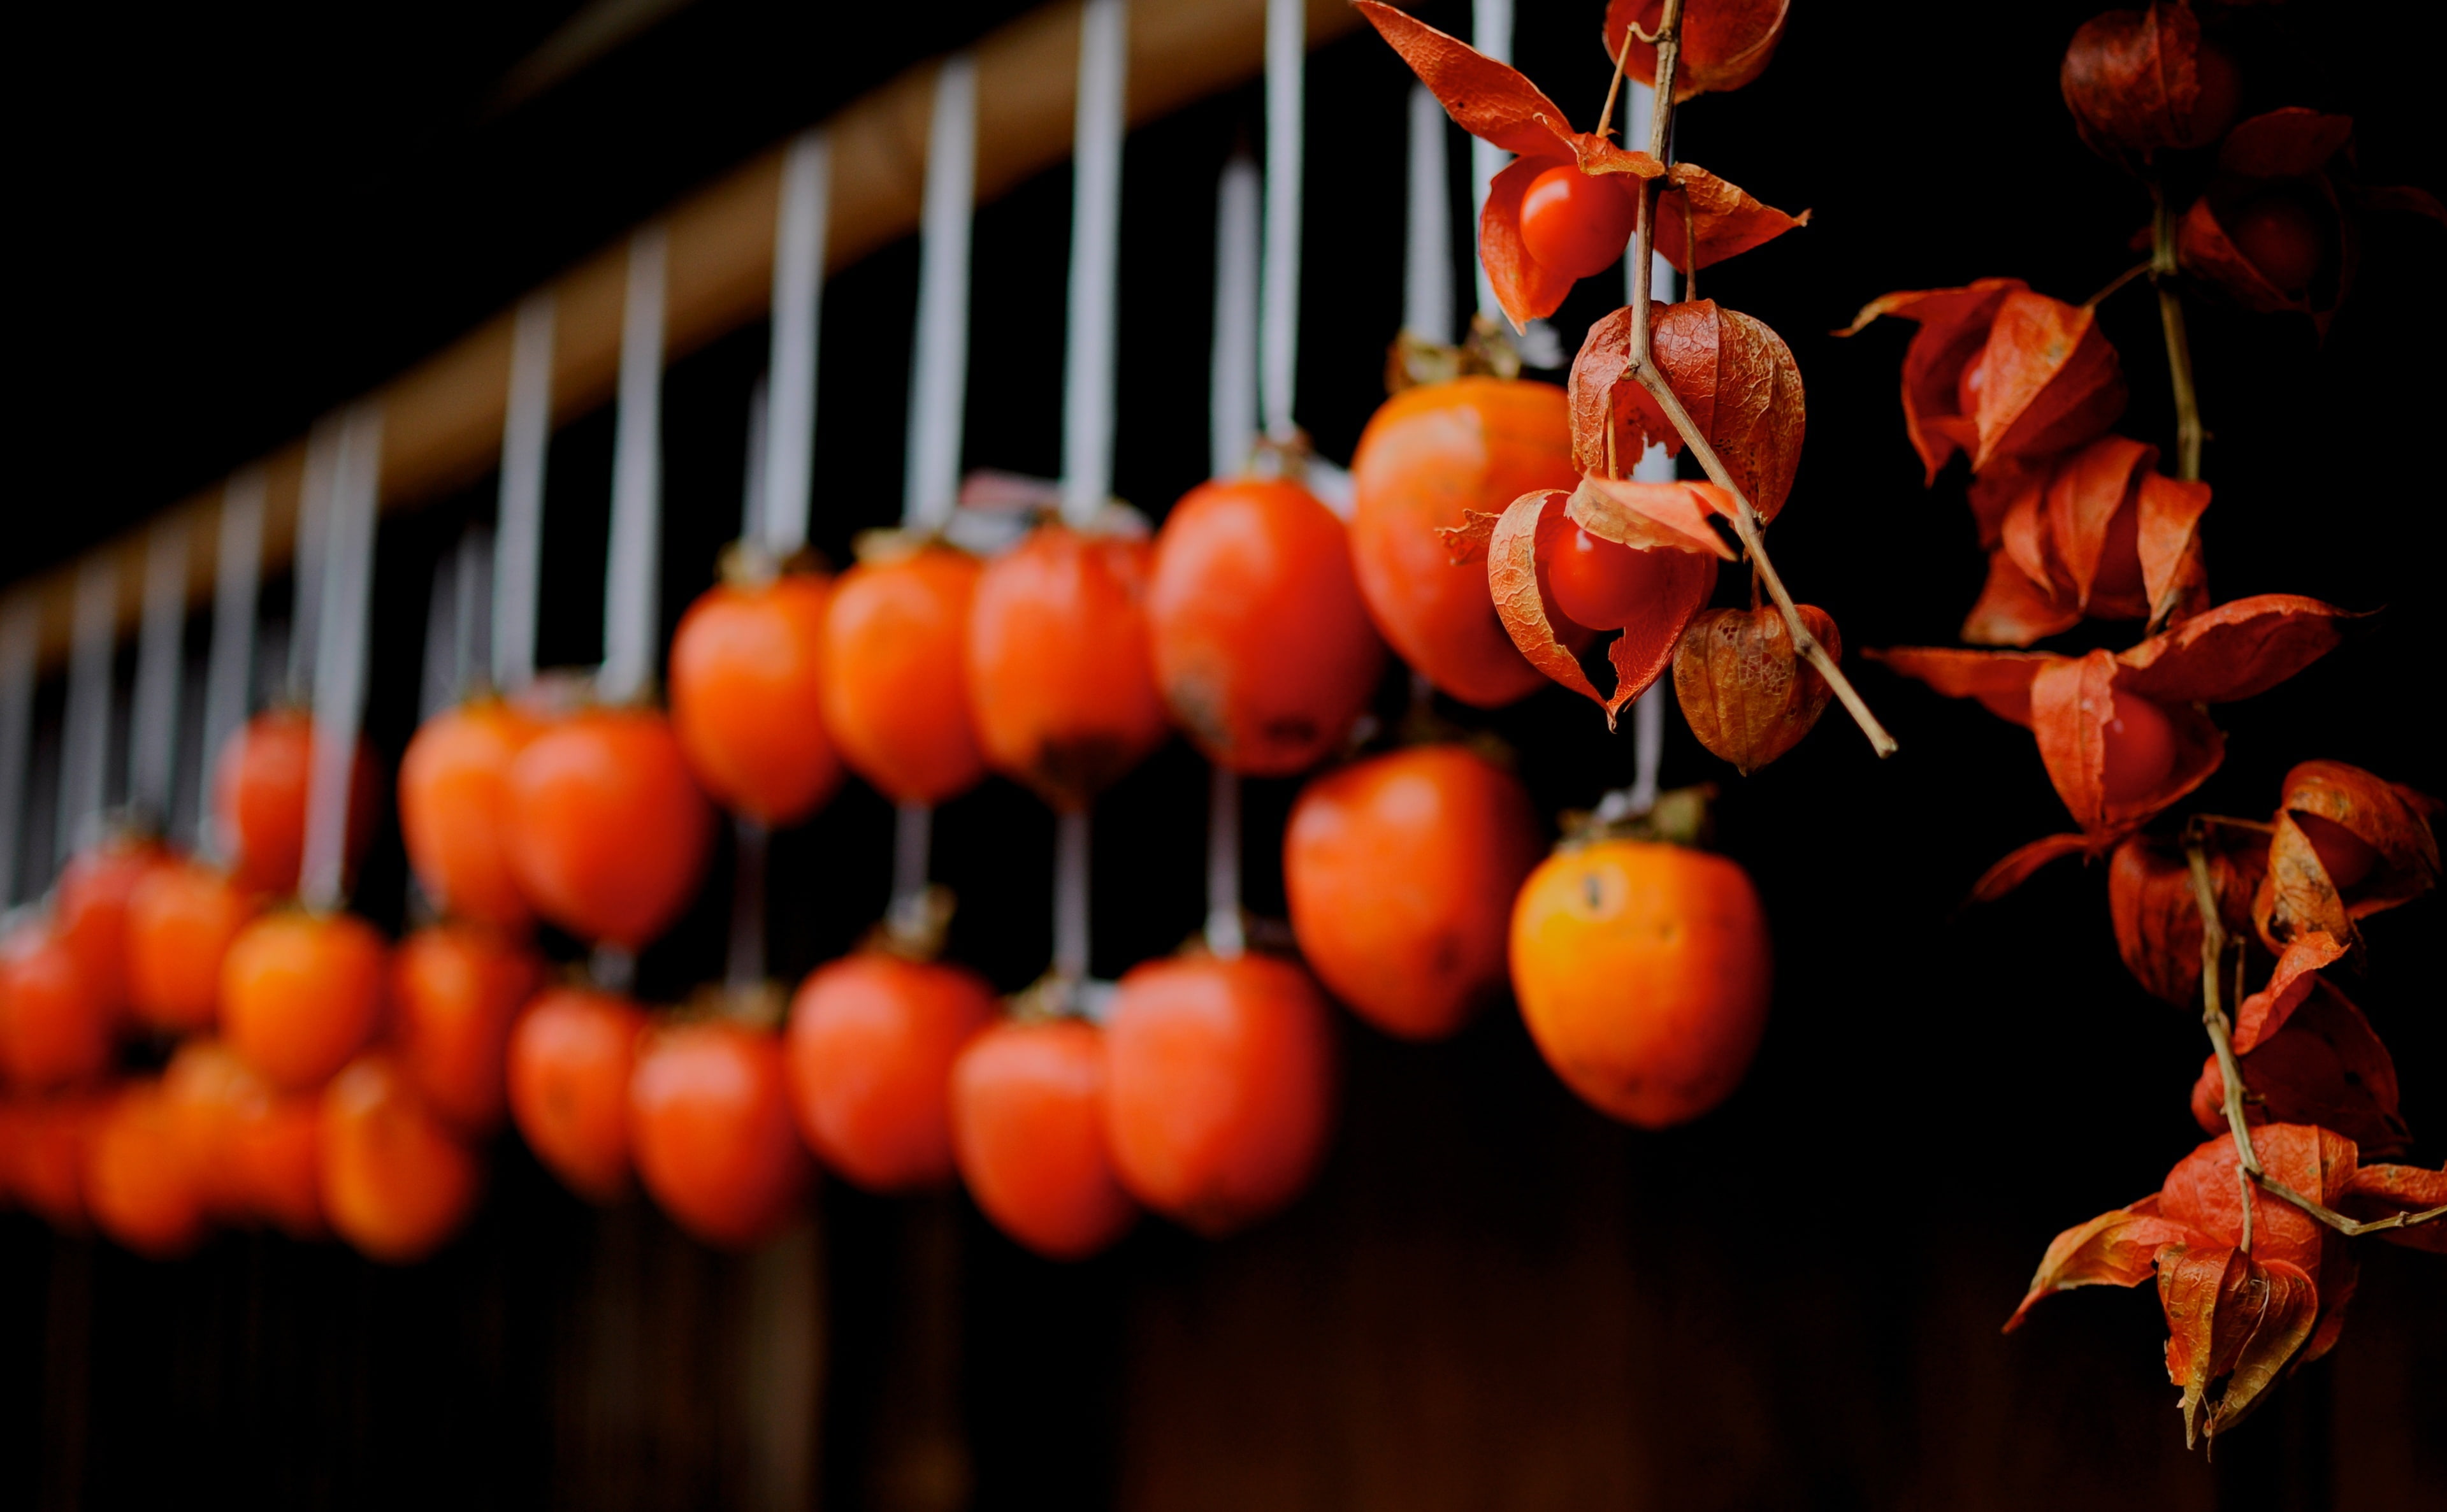 Drying Persimmons (Tsumago), red fruits, Asia, Japan, food and drink